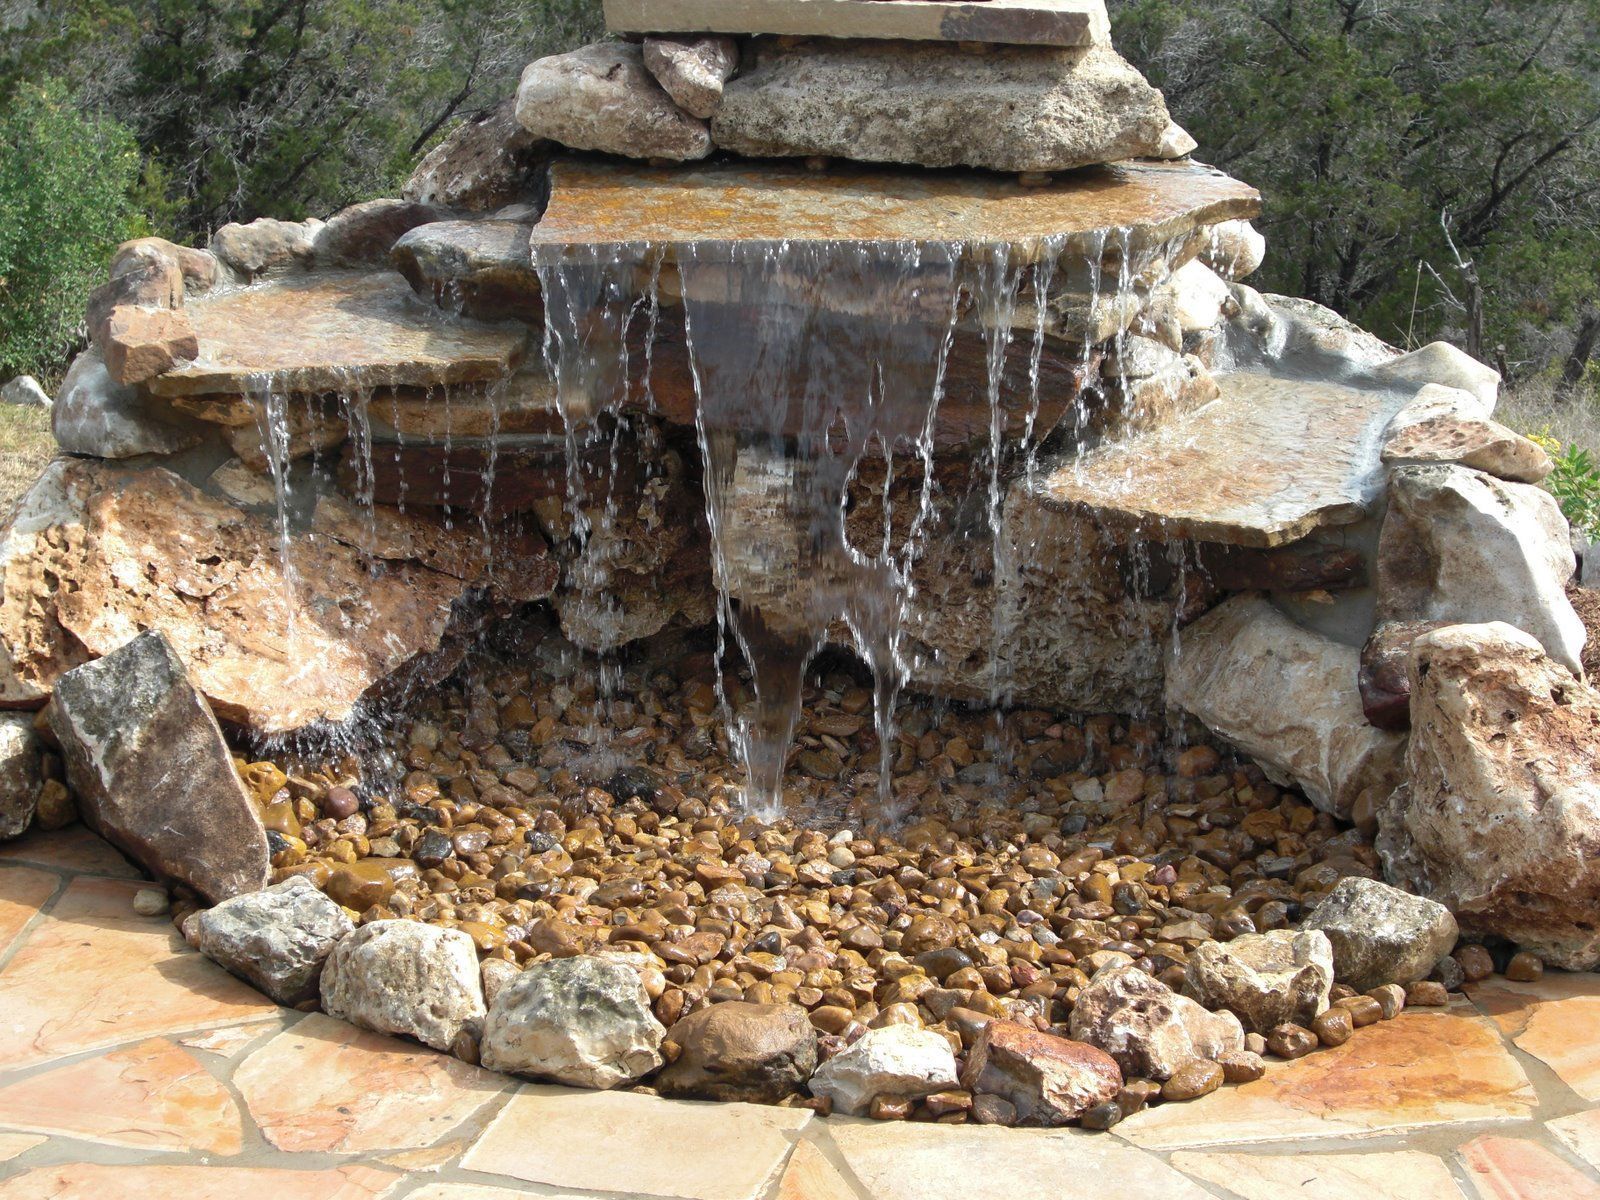 Directions for Installing a Pondless Waterfall Without Buying an Expensive Kit | Hunker -   18 garden design Pergola water features ideas